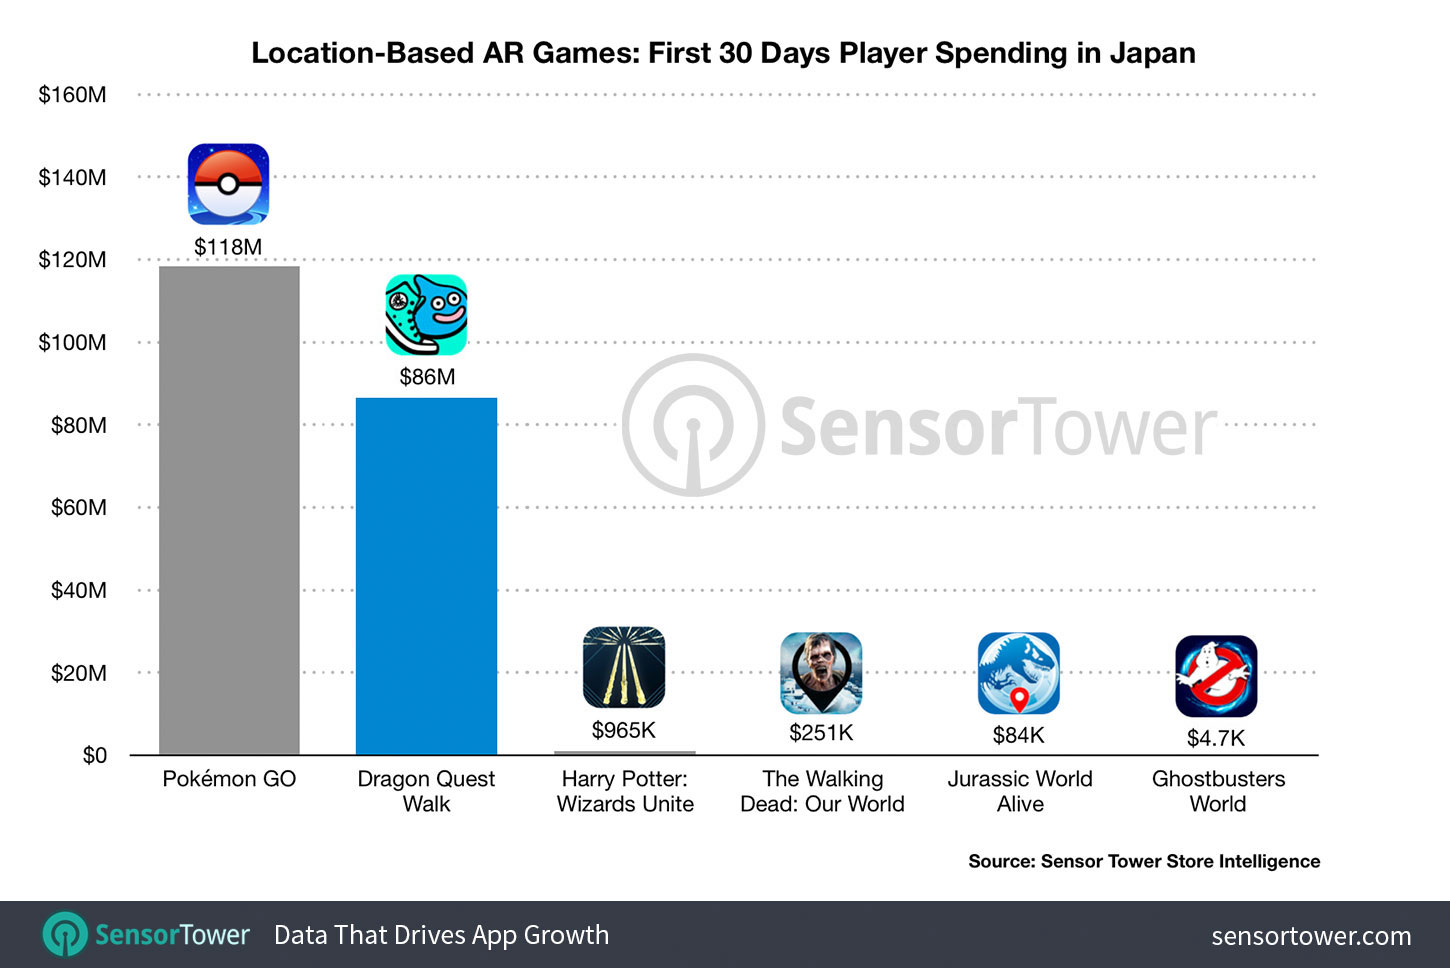 Location-Based AR Games: First 30 Days Player Spending in Japan